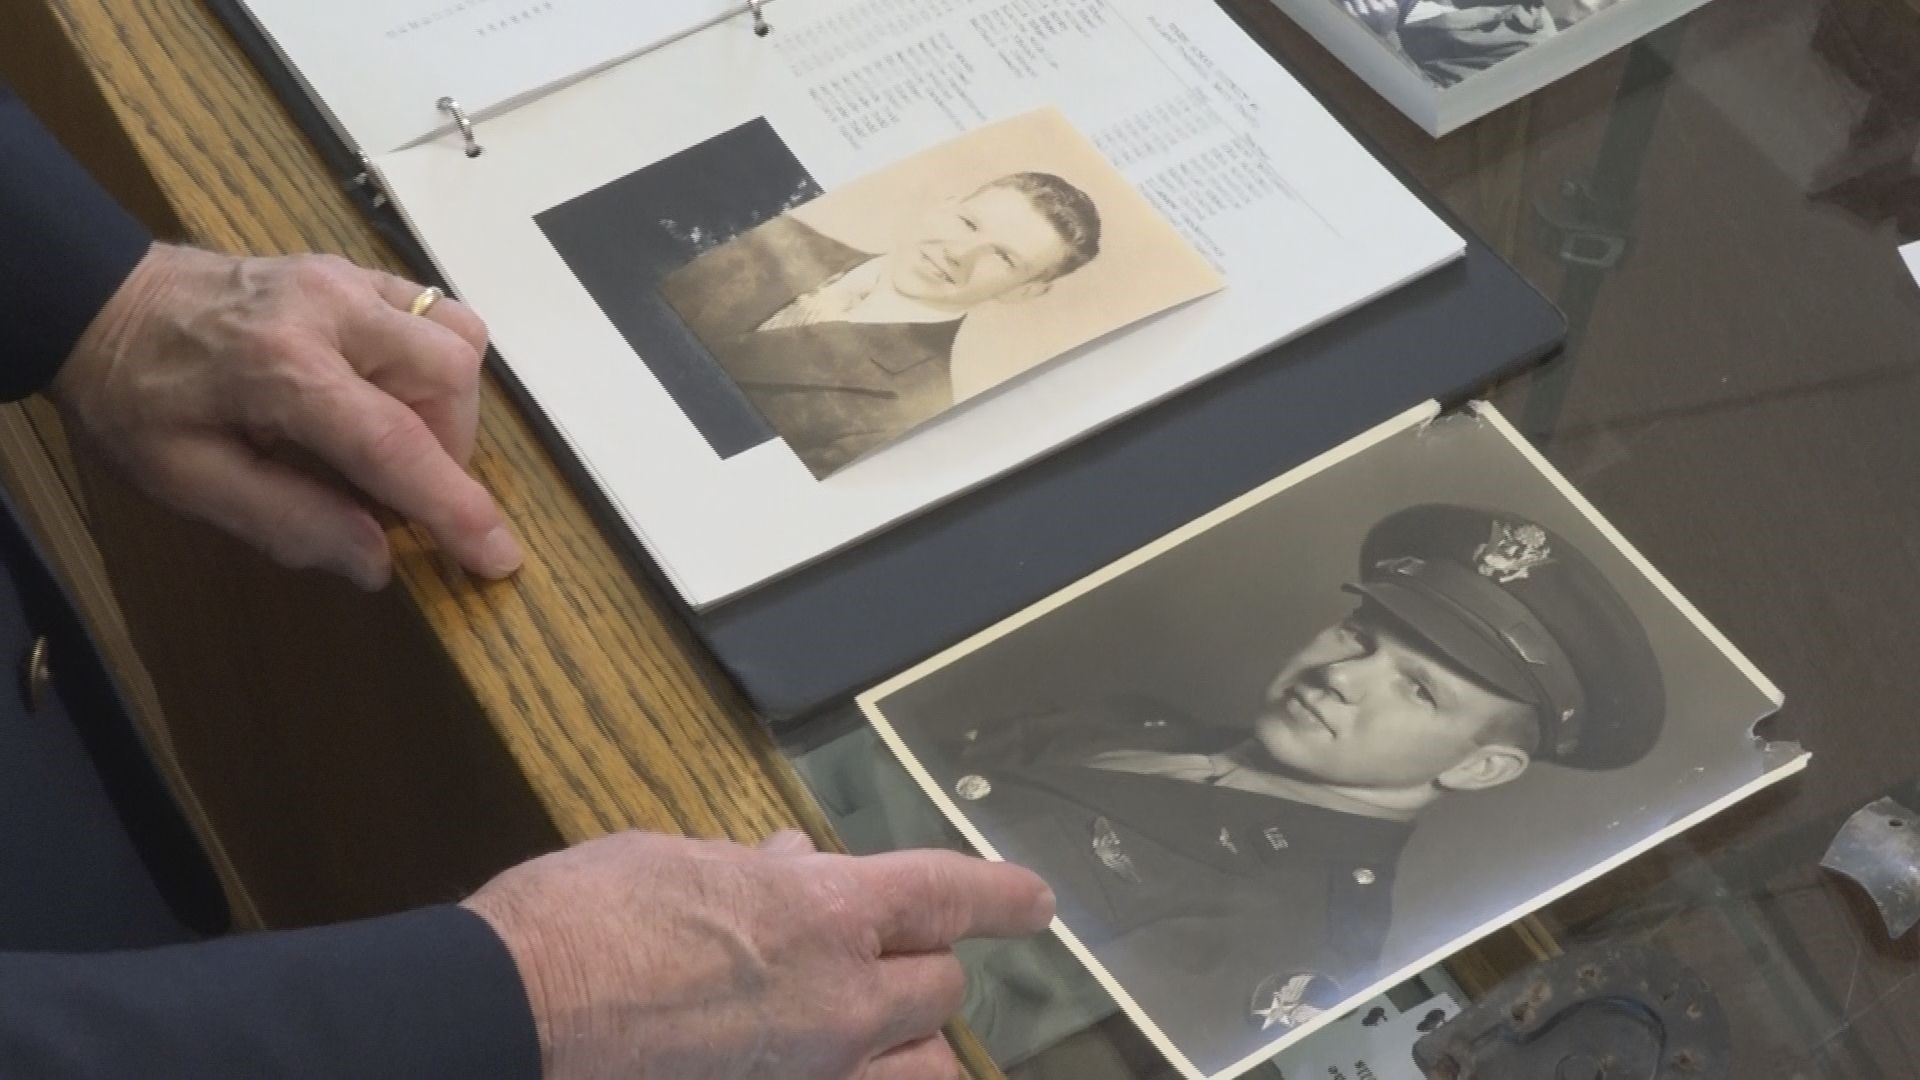 Jim Dibble of Gun Lake has spent decades researching his uncle’s involvement in WWII. It started in 1986 when Jim visited the U.S. Airforce Museum in Dayton, Ohio.